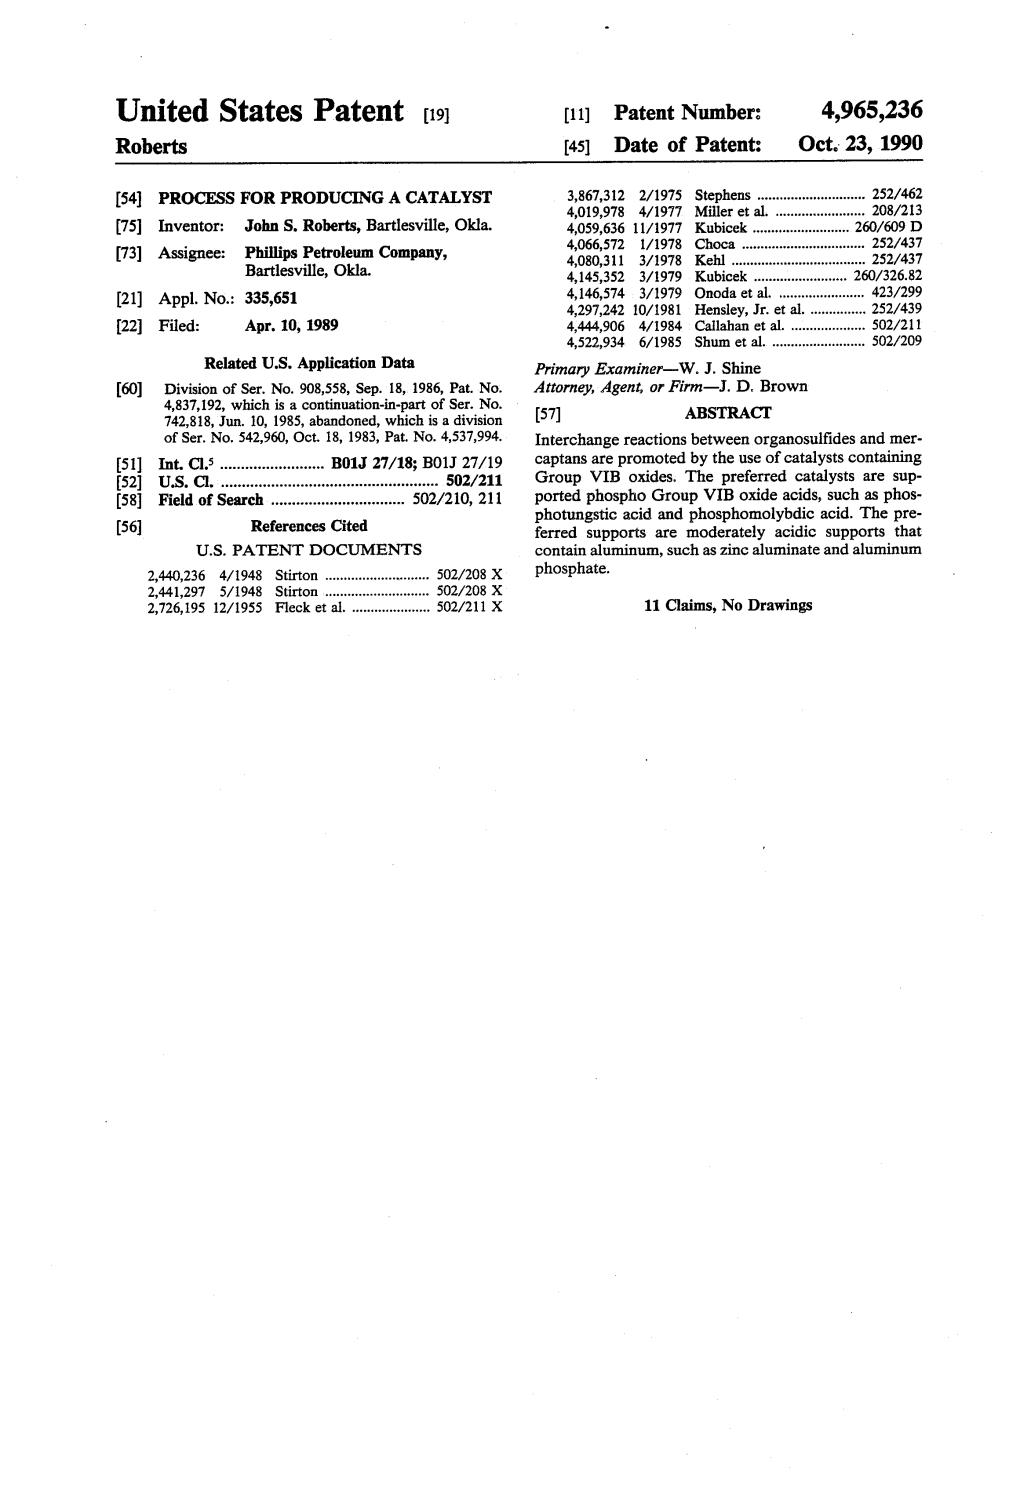 United States Patent (19) 11 Patent Number: 4,965,236 Roberts 45 Date of Patent: Oct